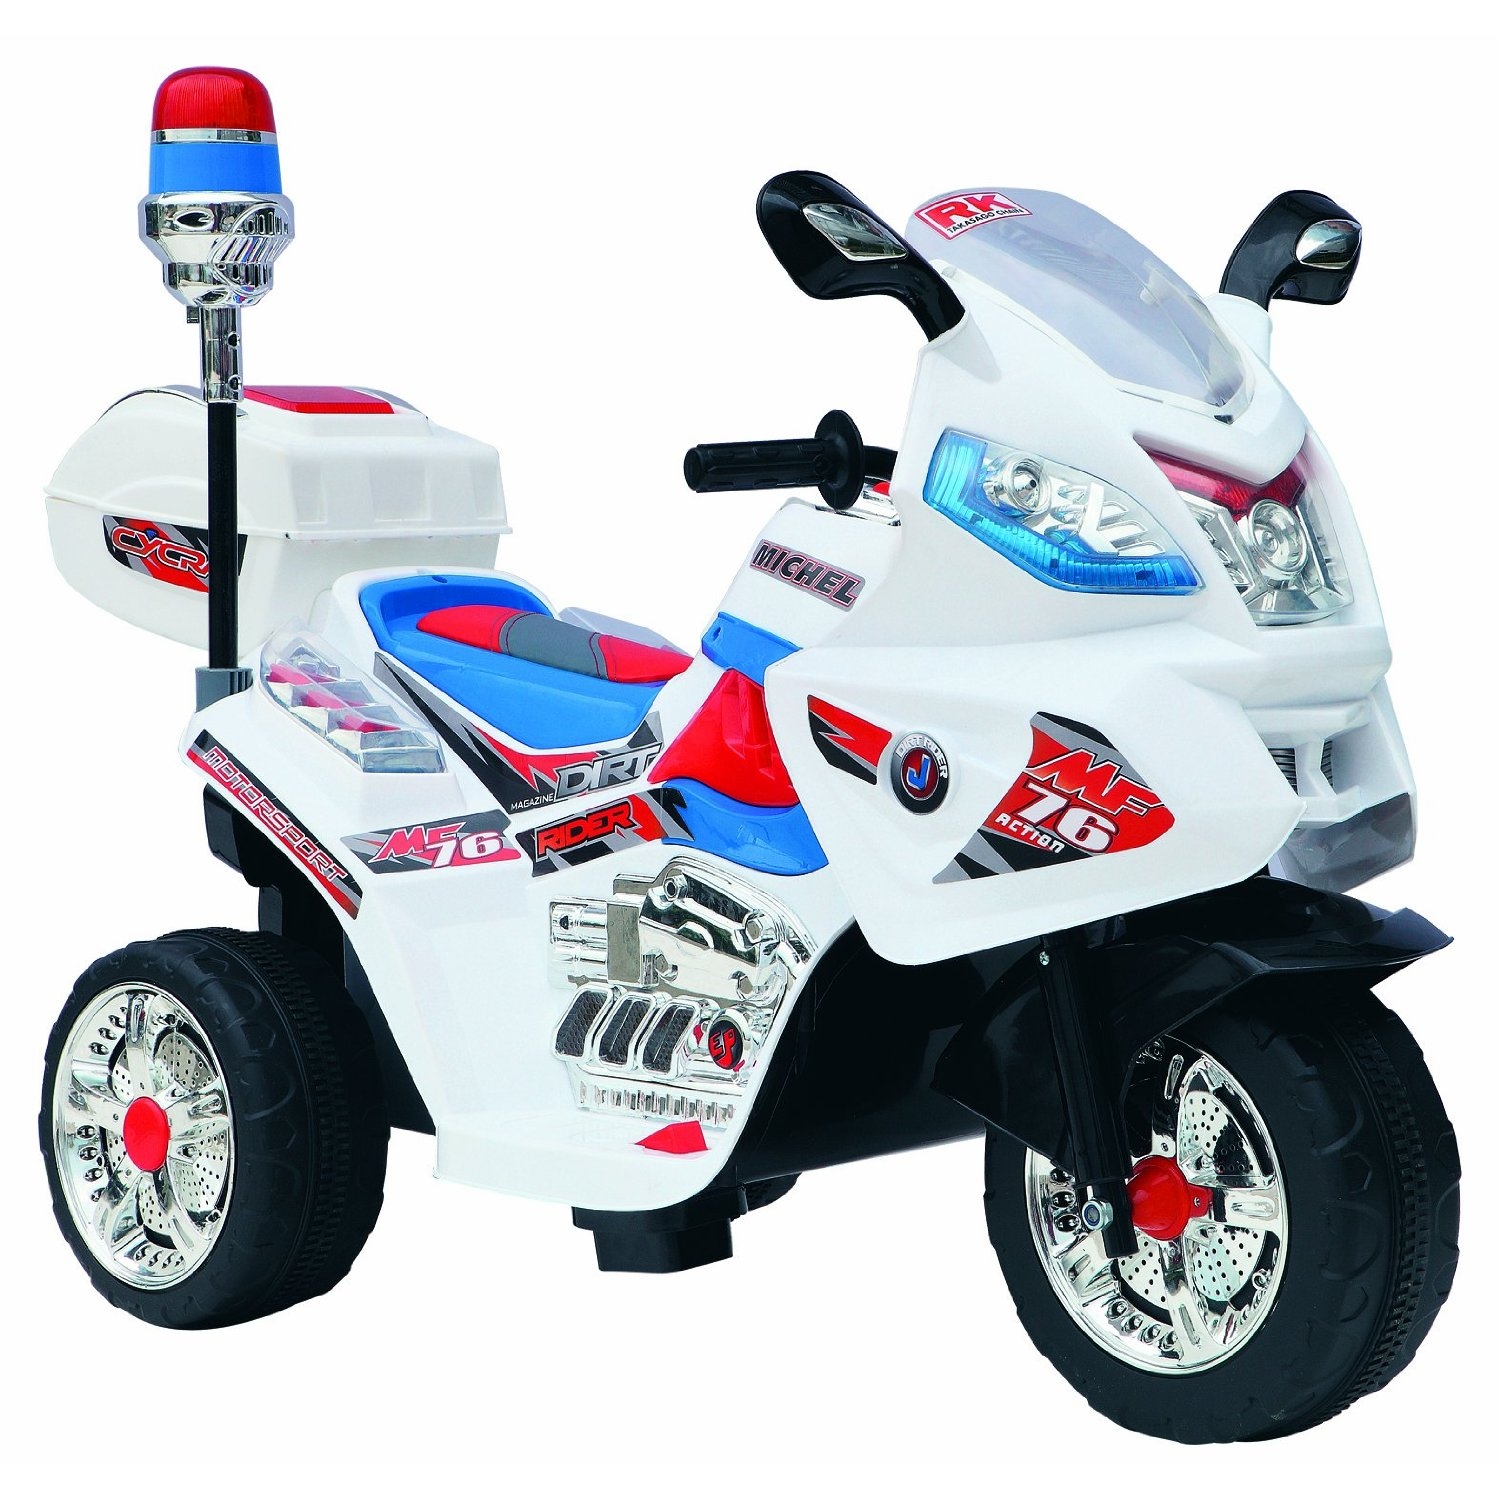 Review of Police MotorBike Trike 6v Ride-0n Toy a Good Kids Toy Idea ...